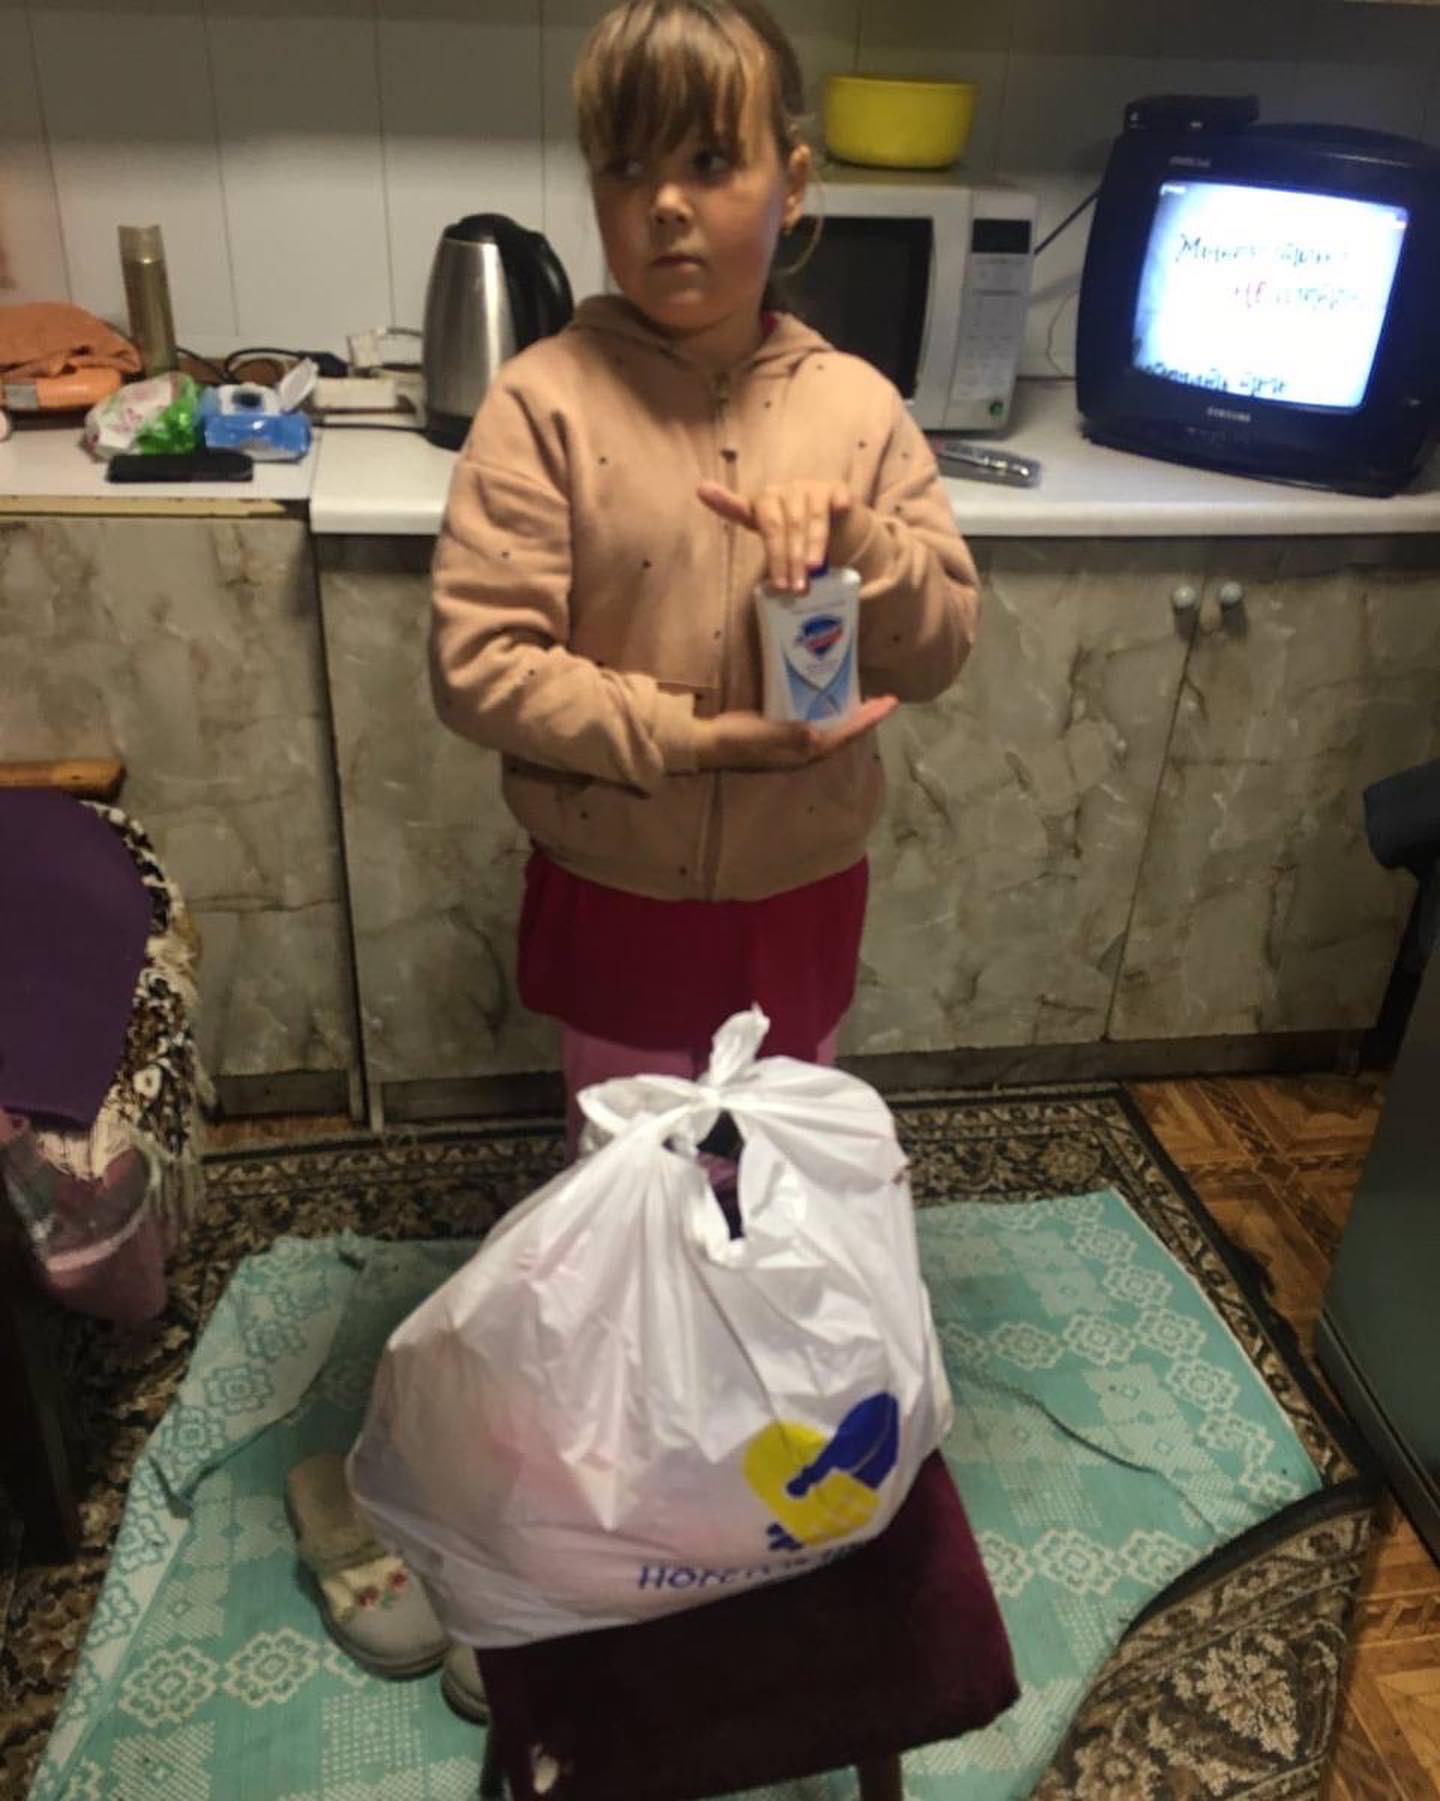 A girl standing in a kitchen holding a bag of food.